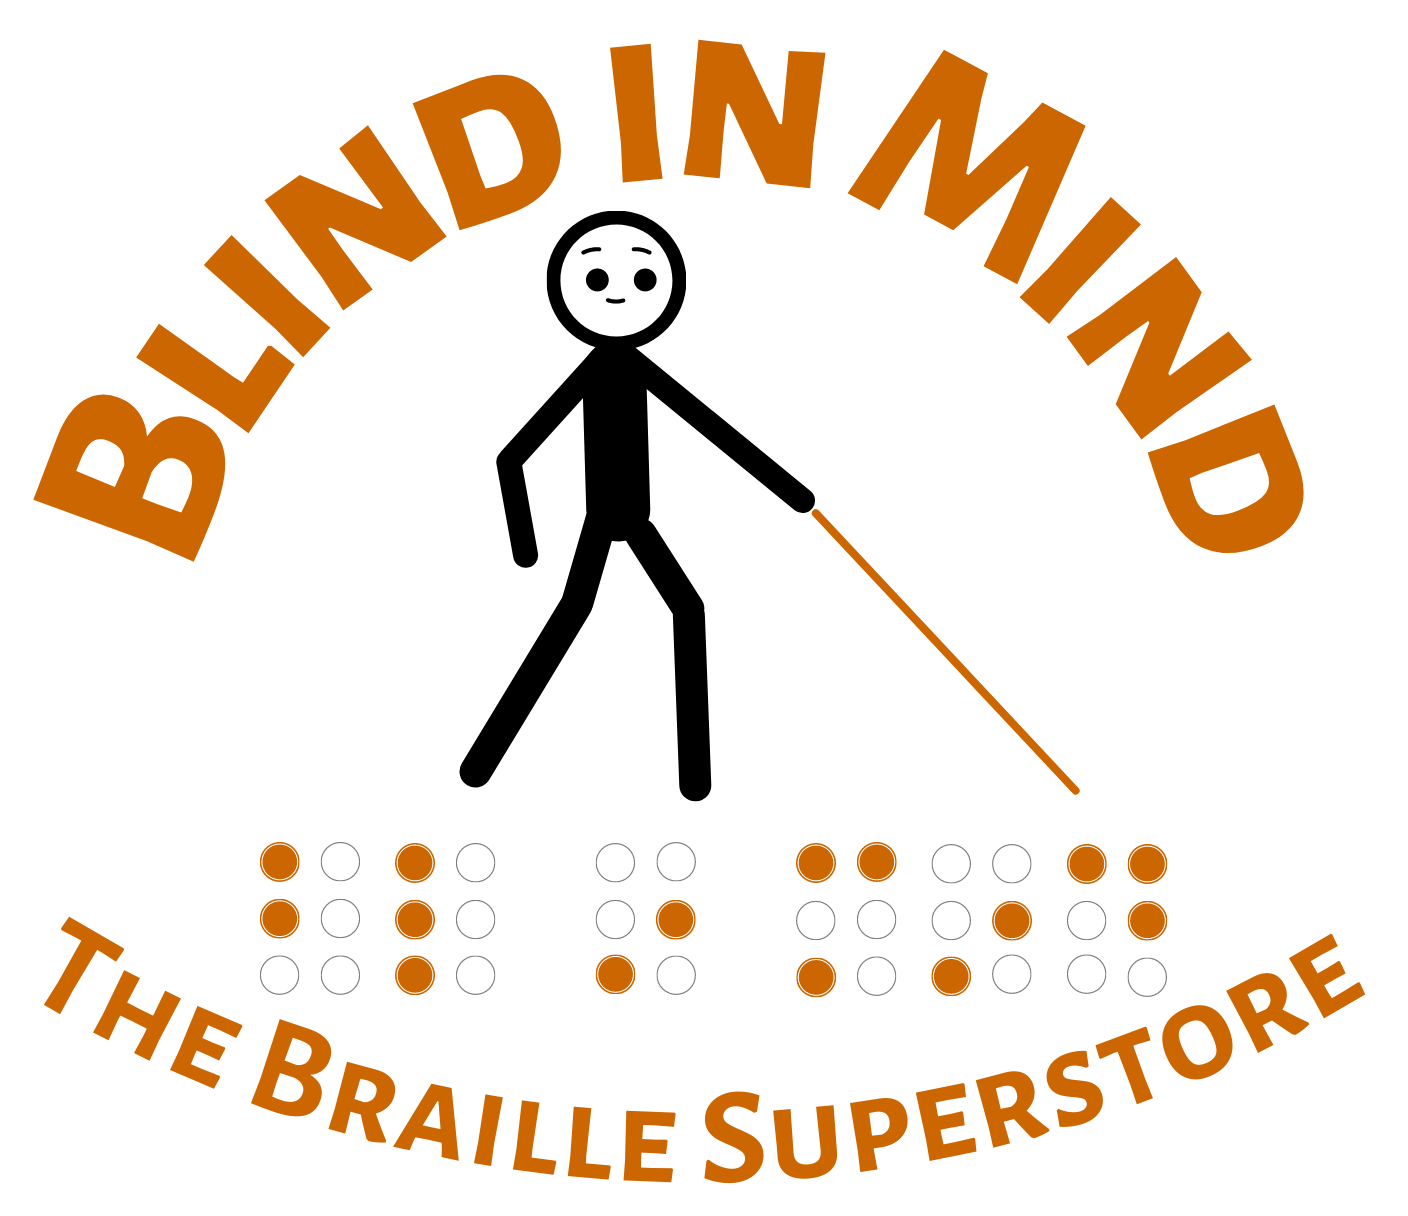 Blind in Mind, The Braille Superstore